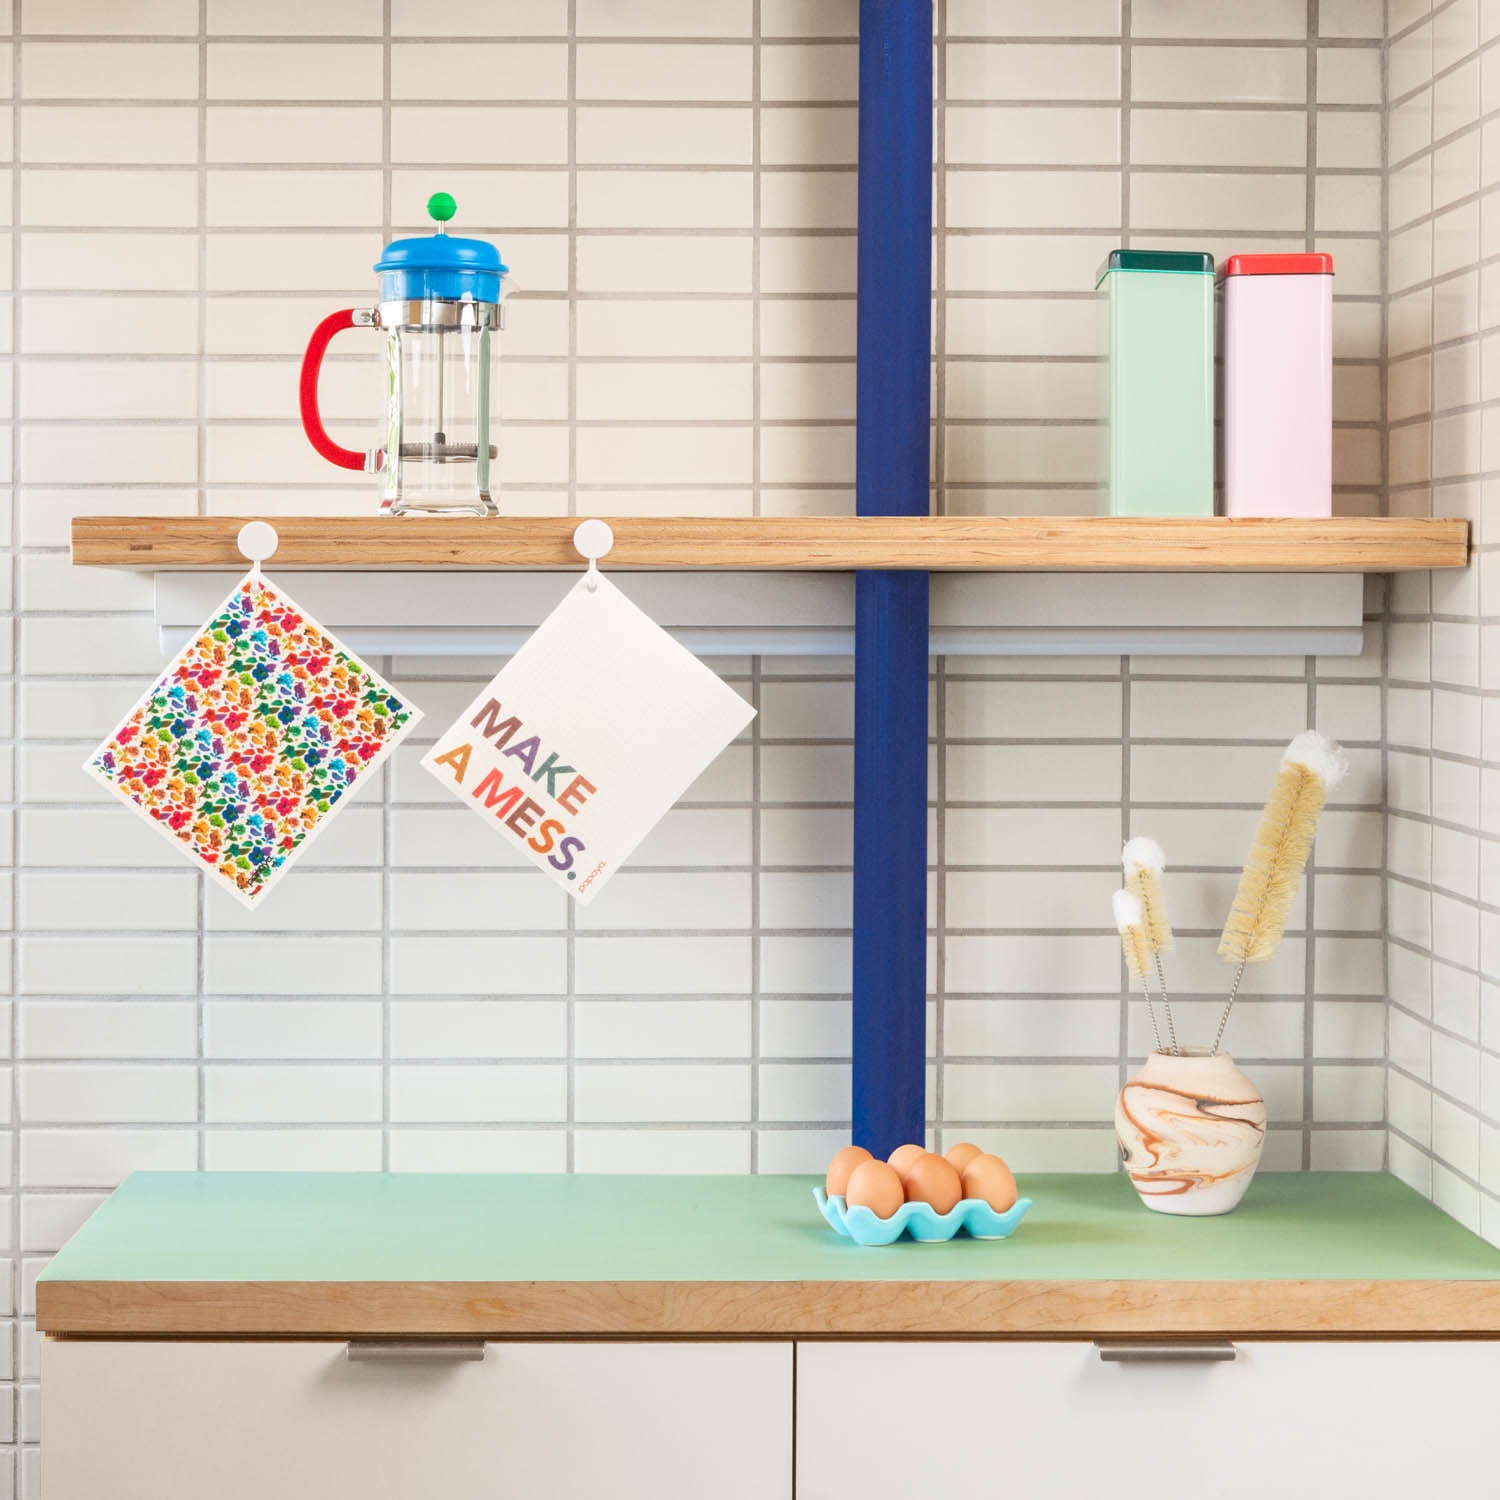 Two reusable paper towels hanging in modern kitchen with colorful floral design and make a mess words